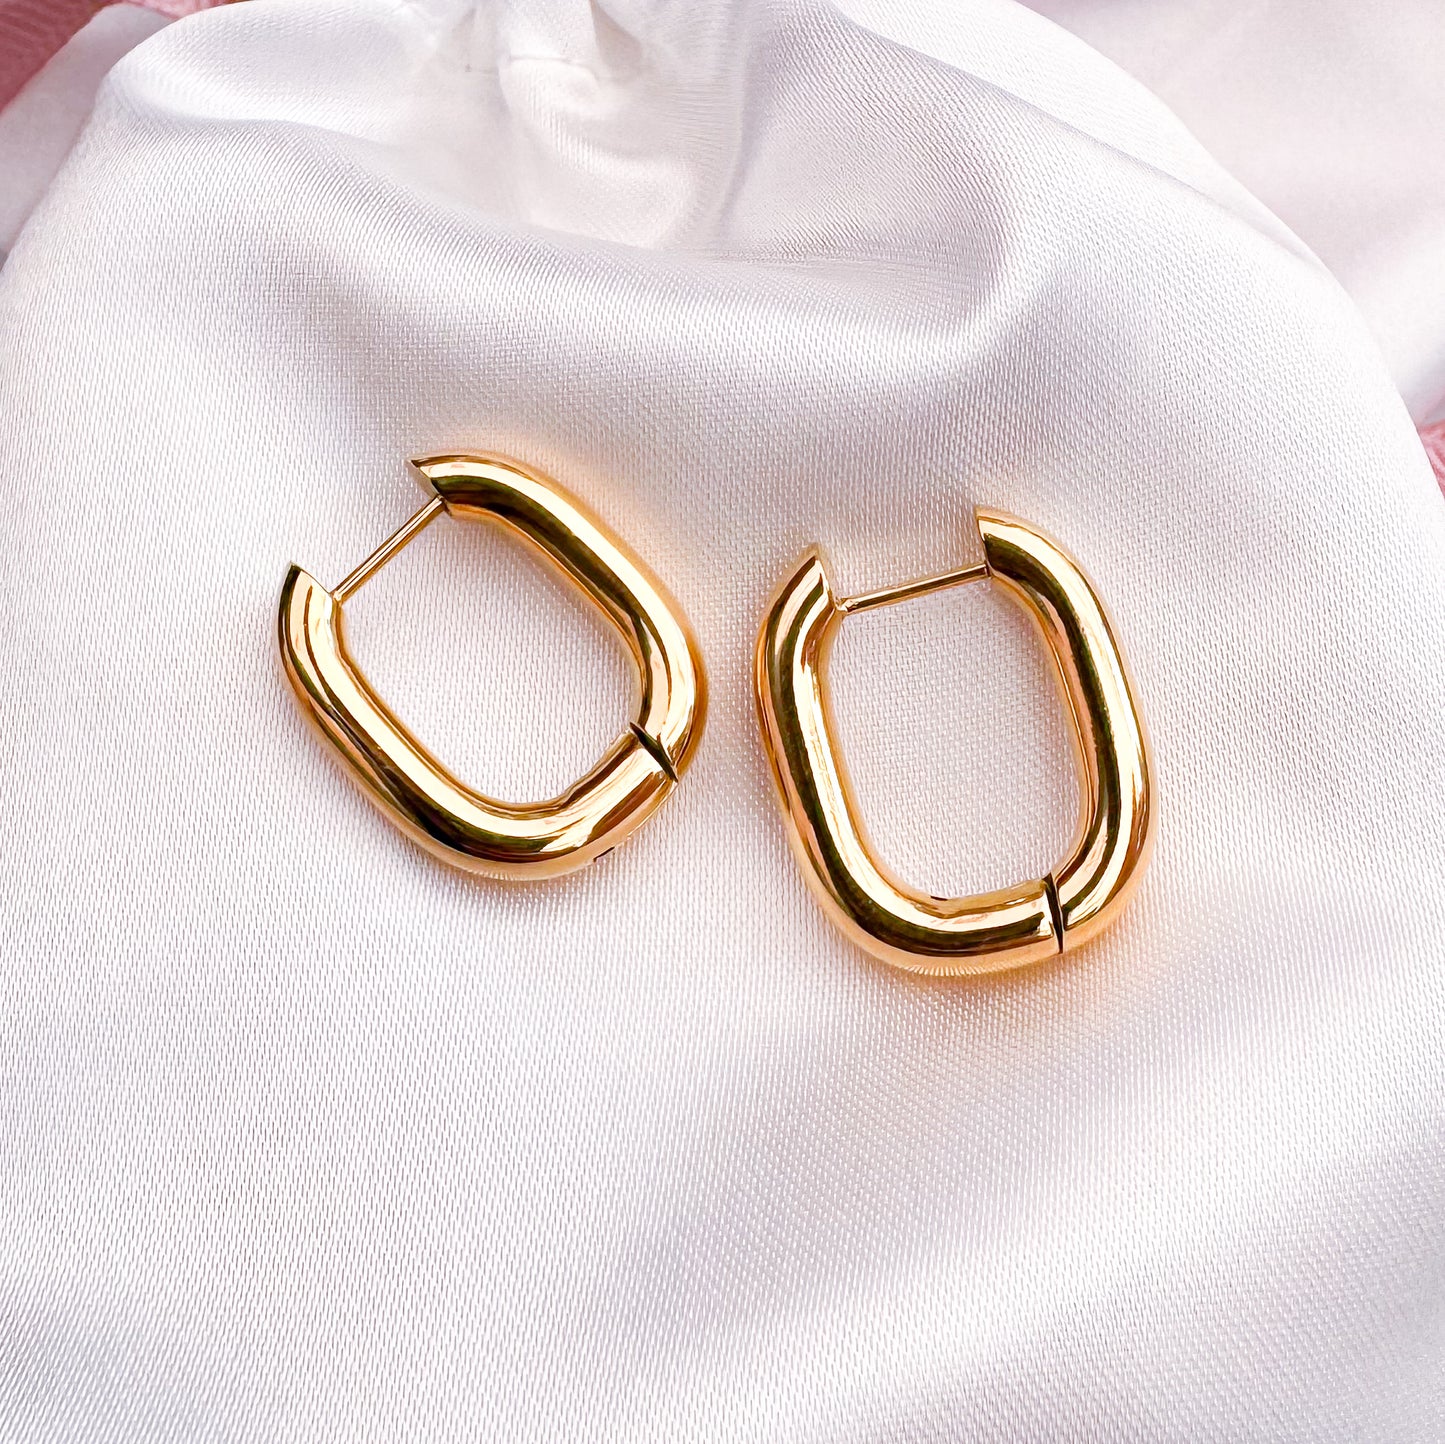 Small gold hoops